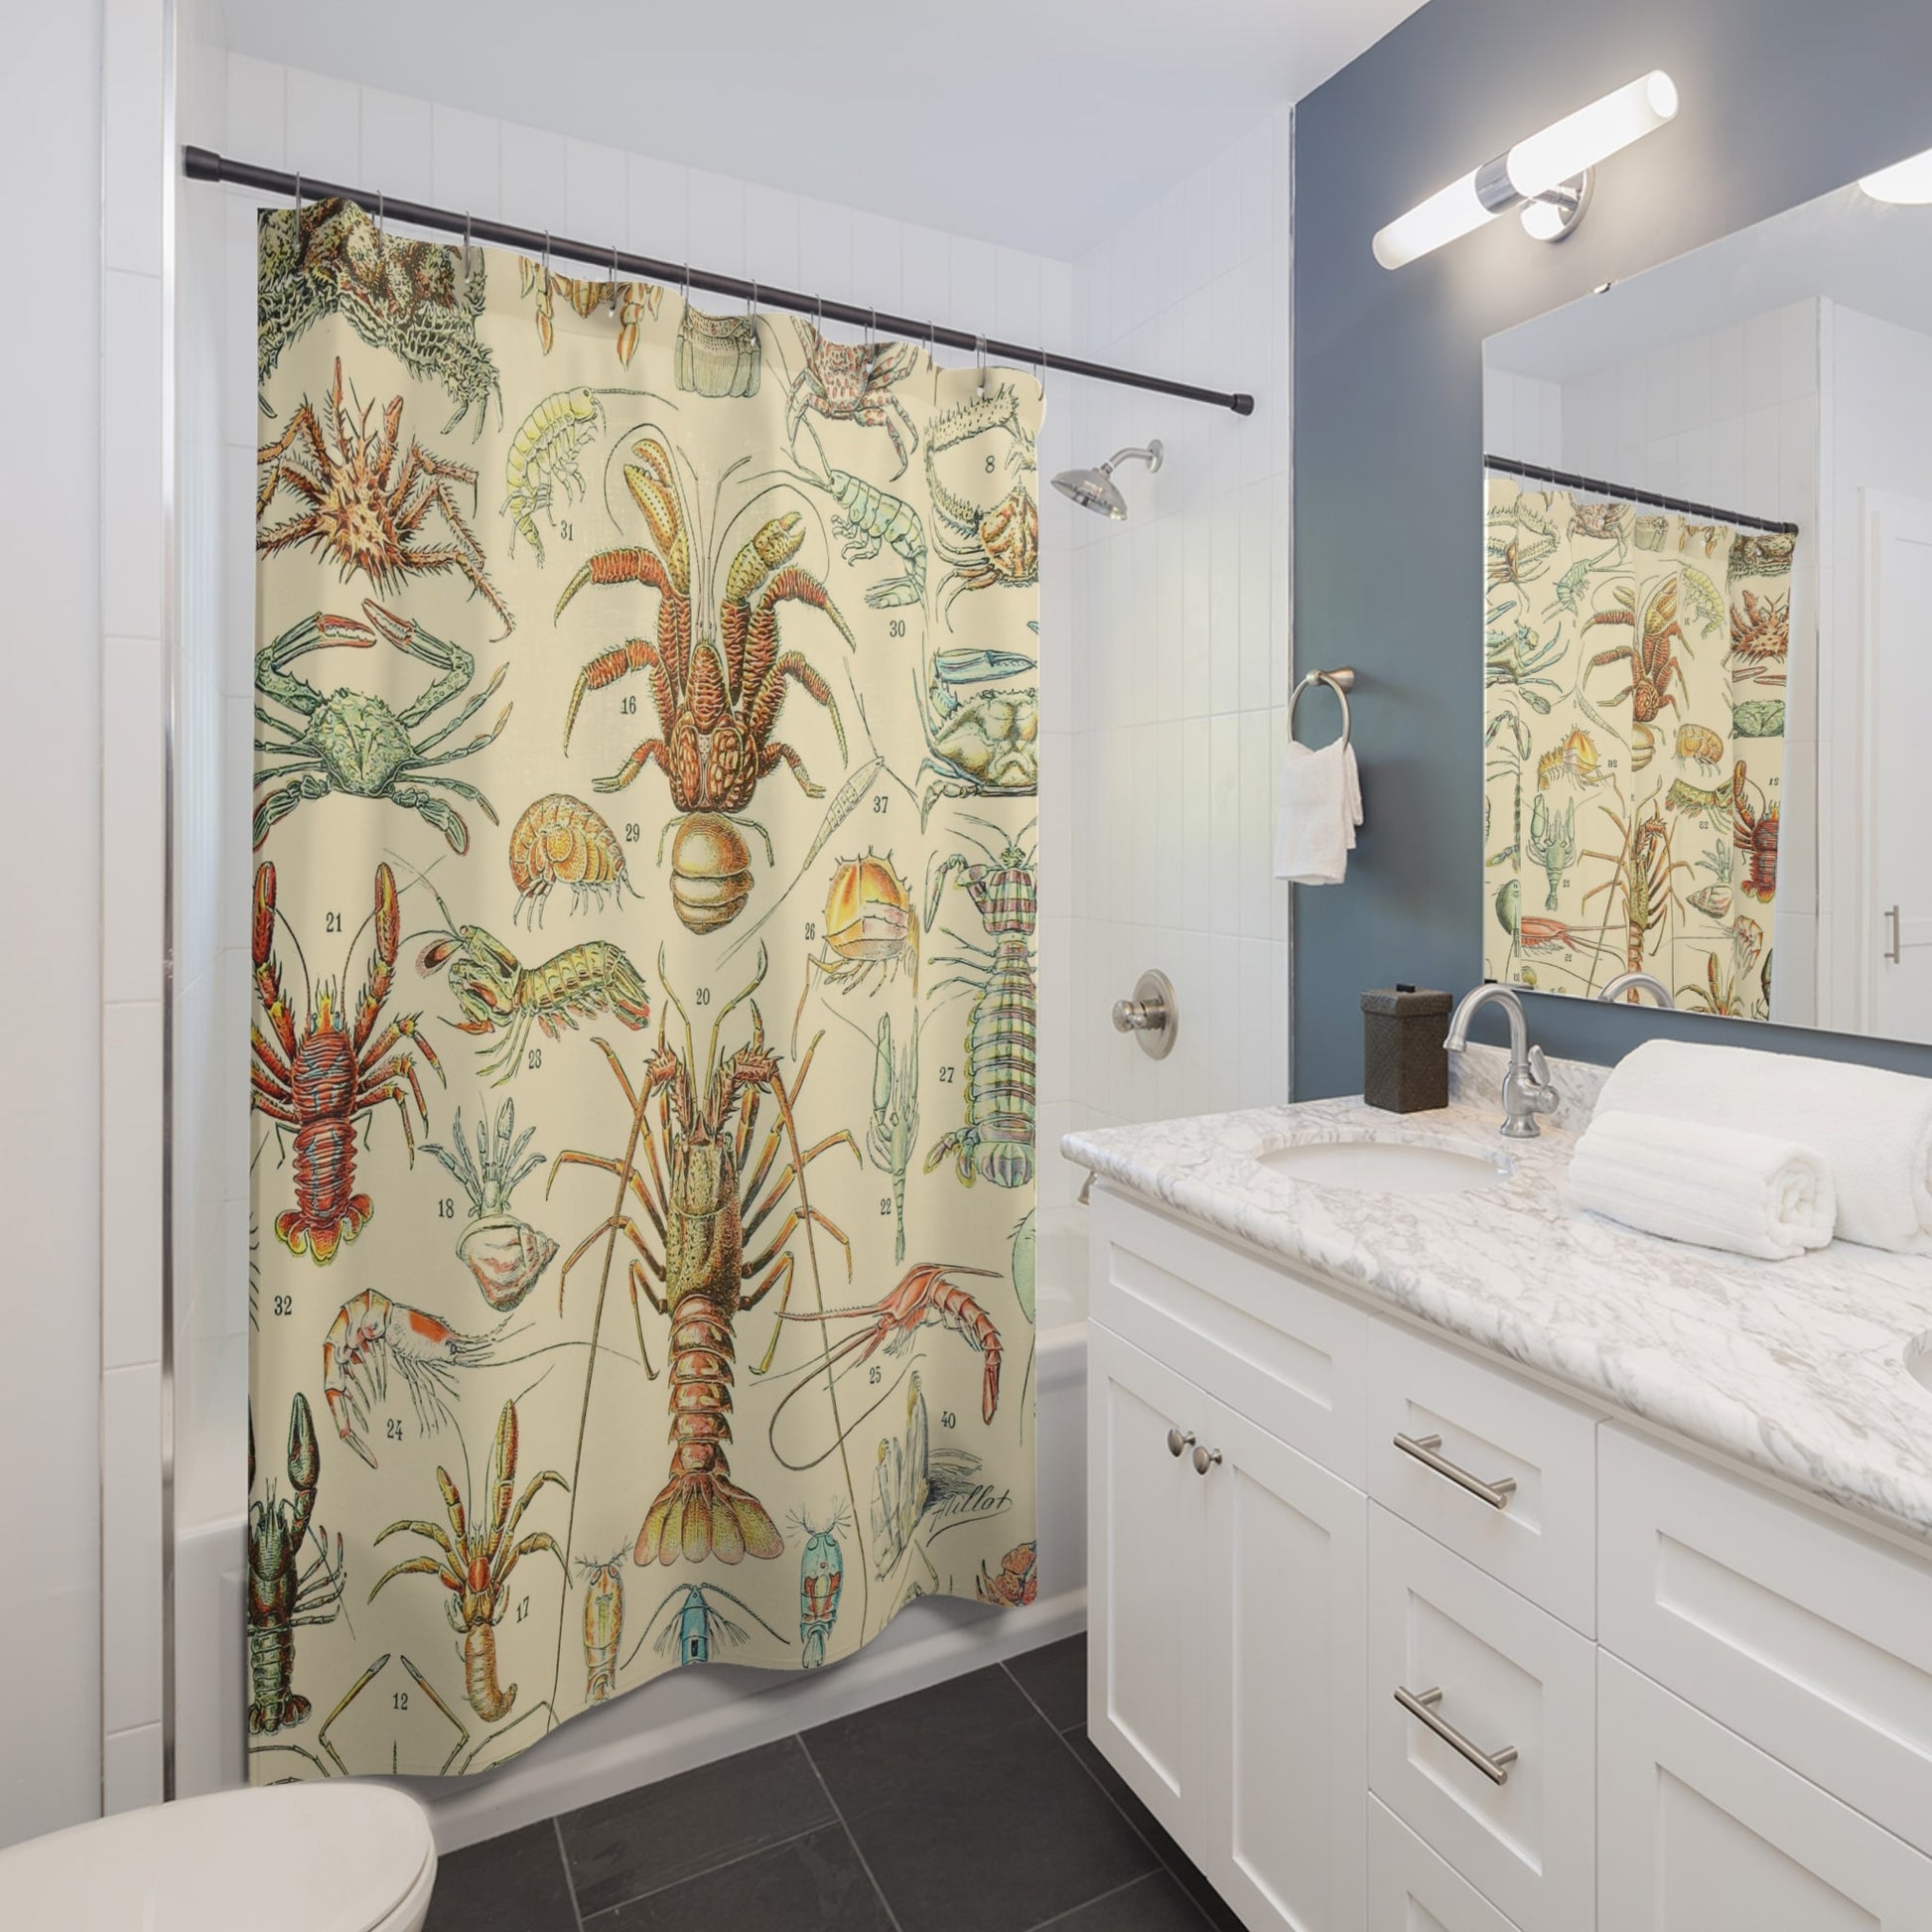 Lobsters and Crabs Shower Curtain Best Bathroom Decorating Ideas for Science Decor